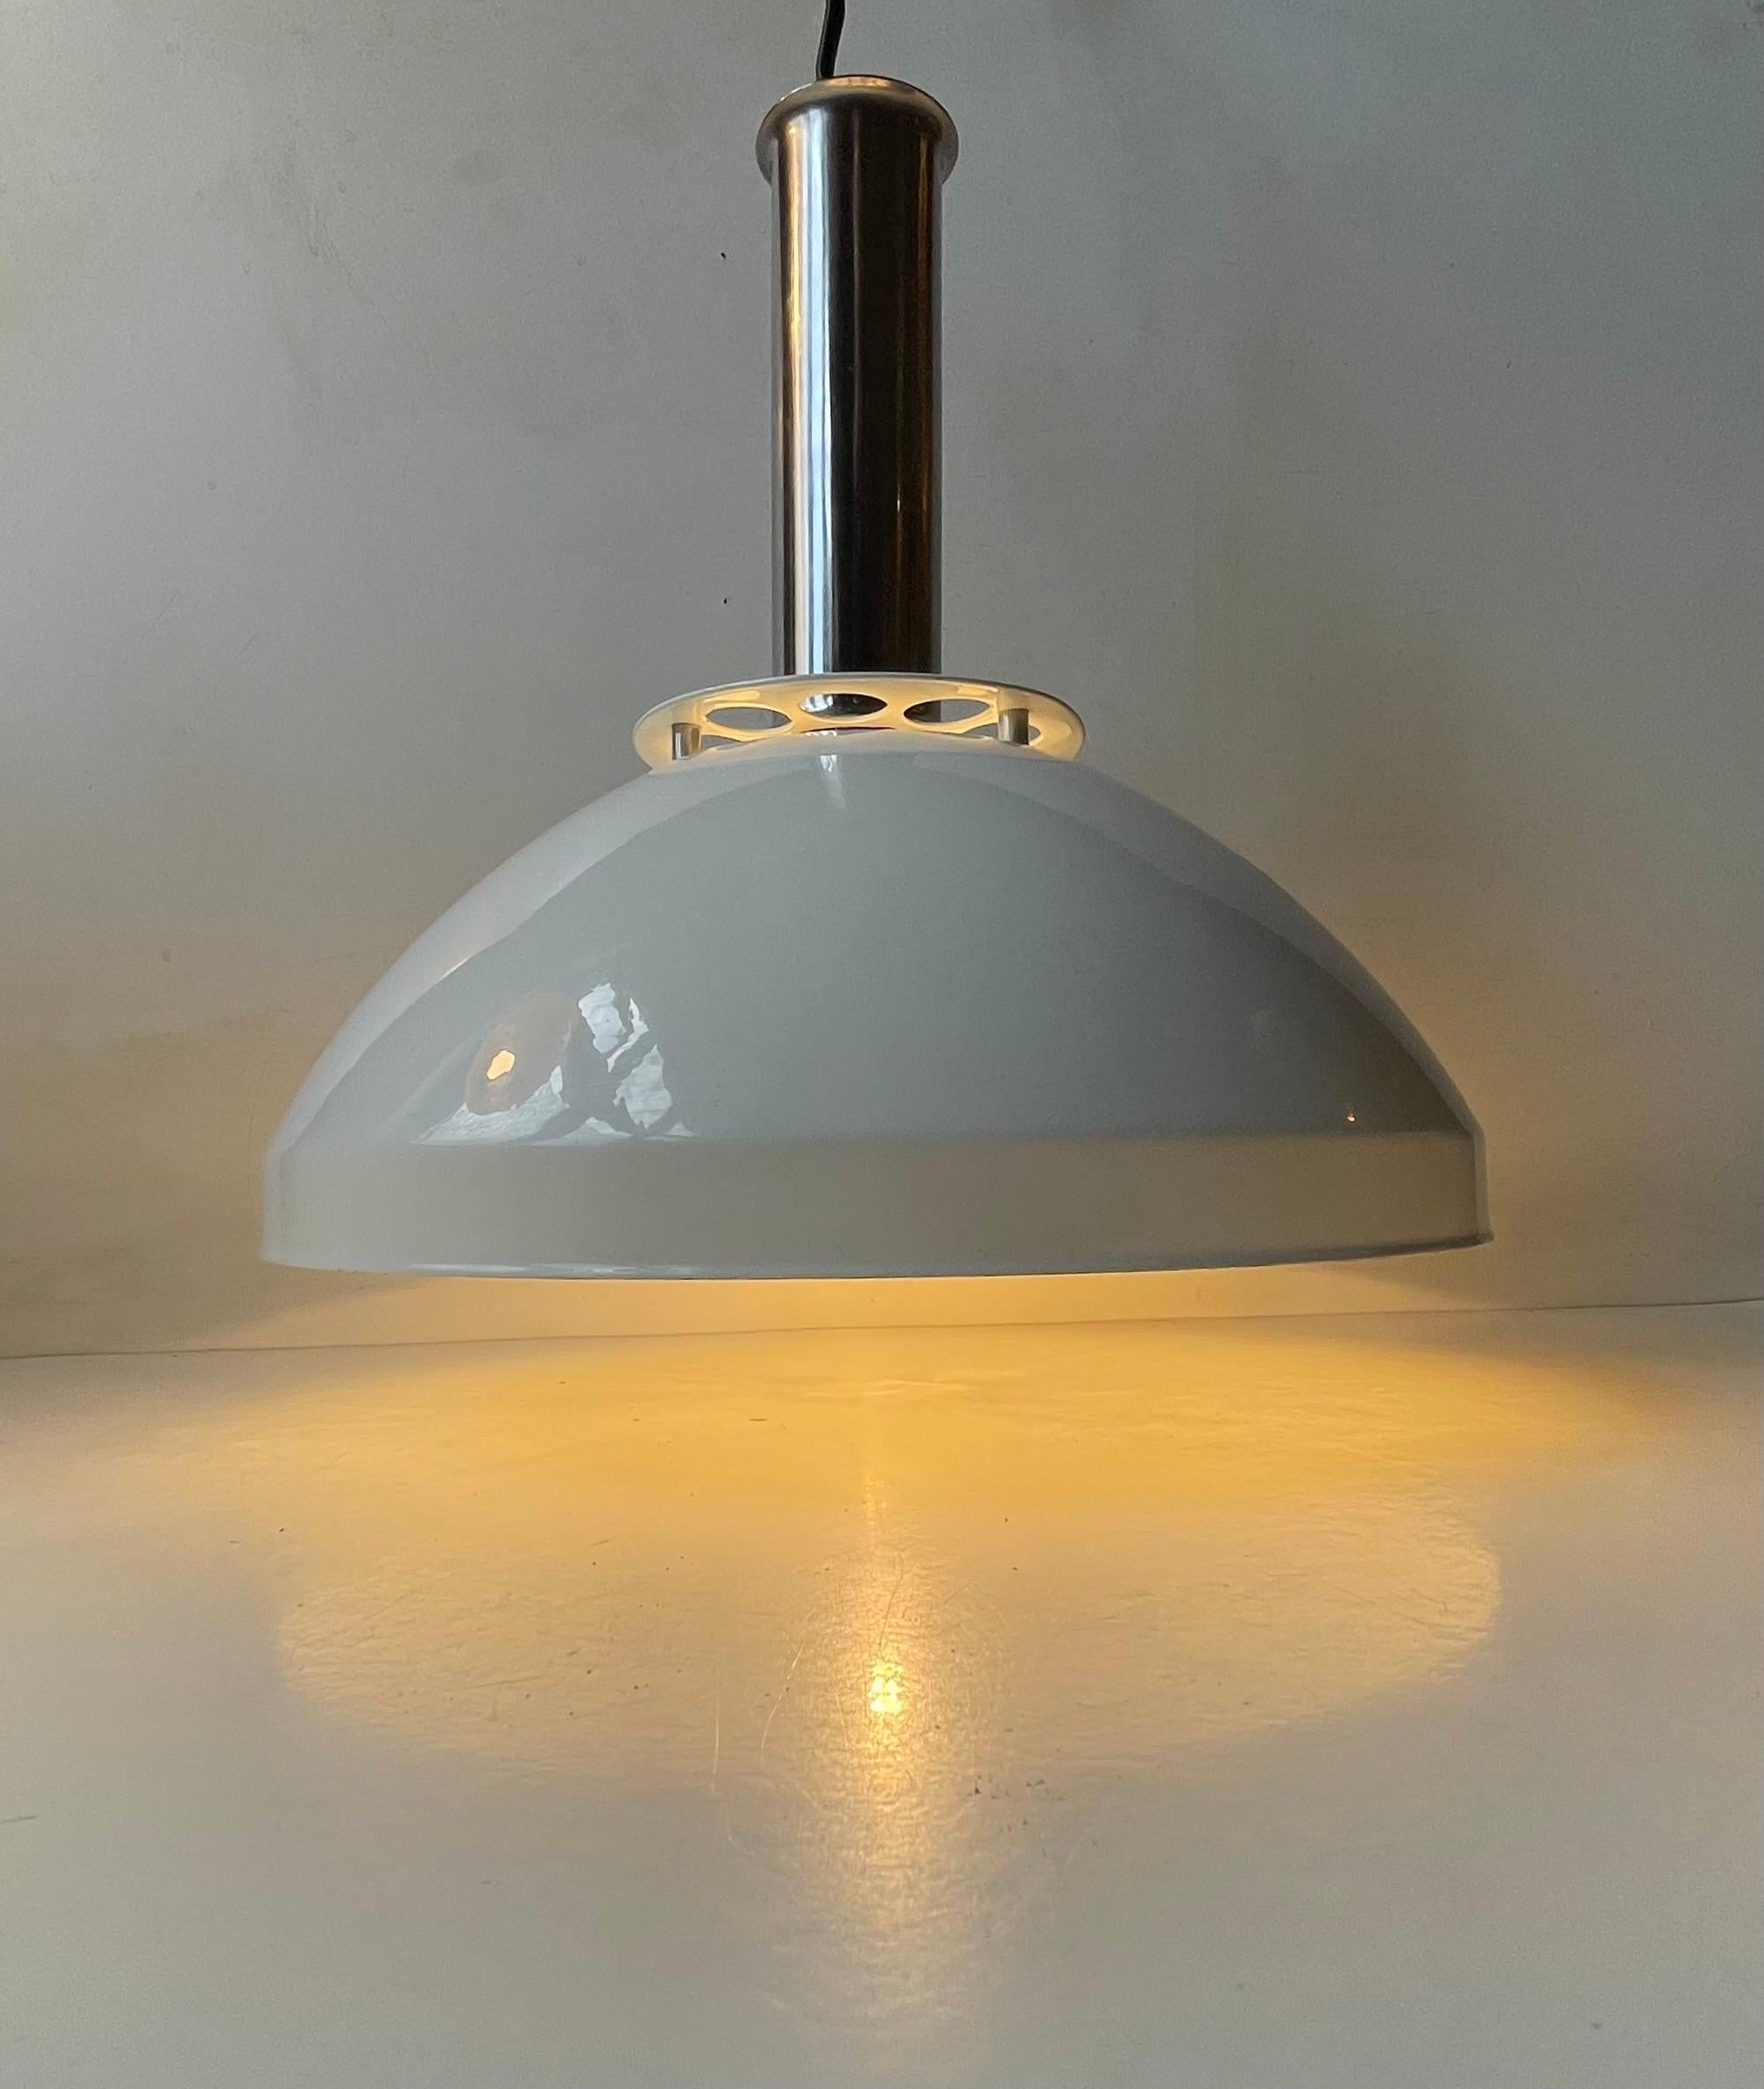 Modern Italian Industrial Ceiling Lamp in White Enamel and Chrome Plating, 1970s For Sale